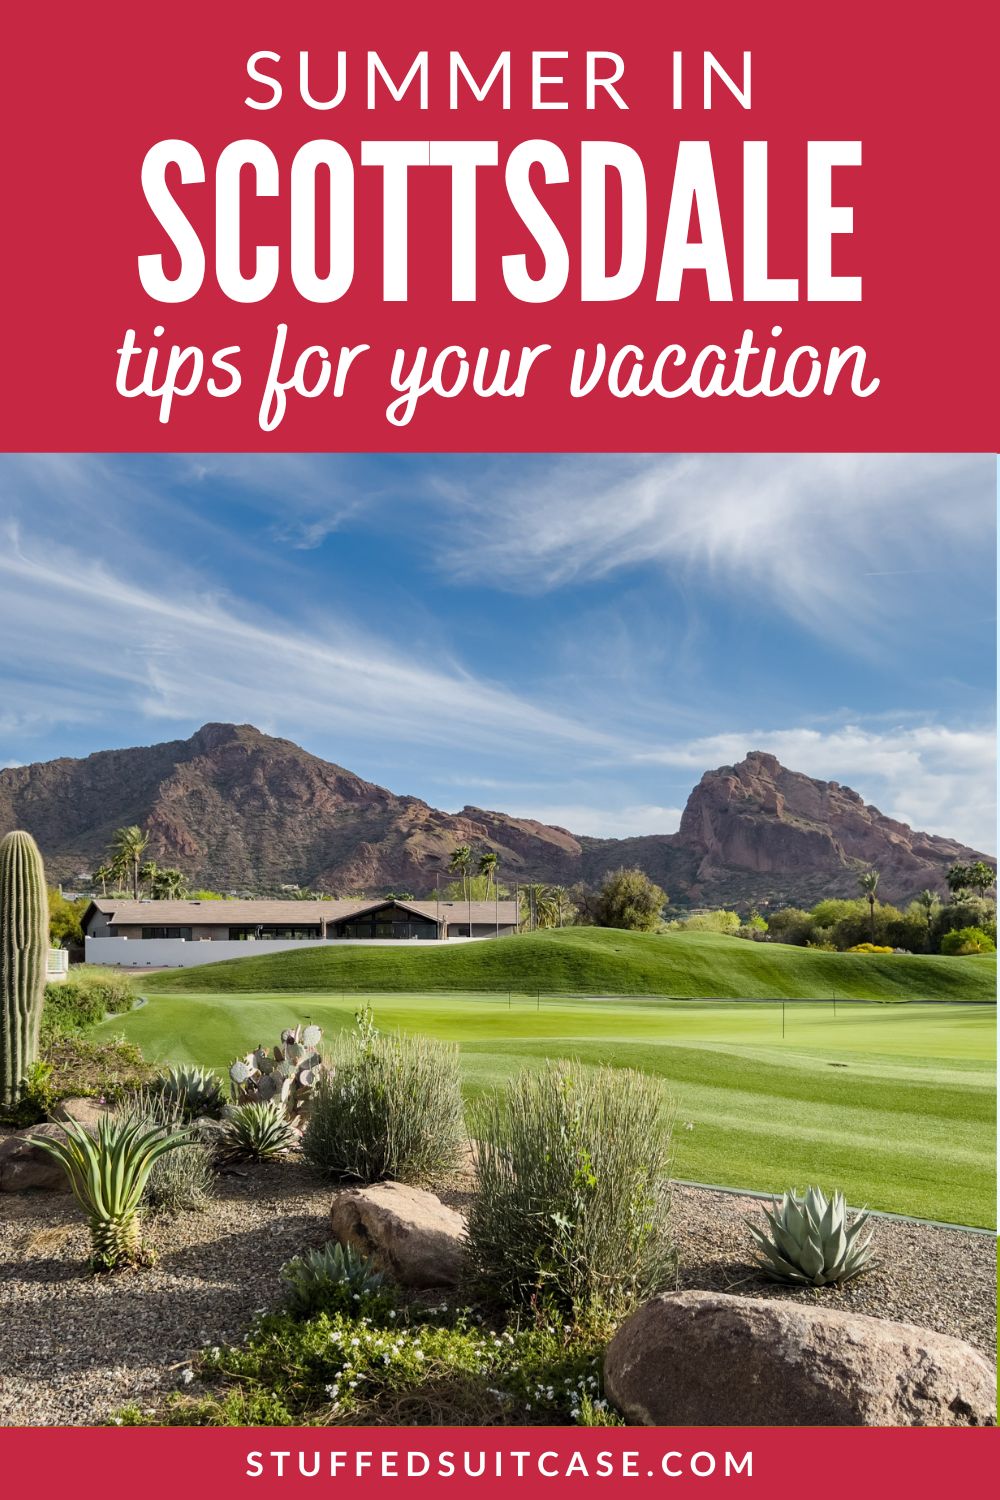 camelback mountain and golf course in scottsdale arizona with text overlay for summer in scottsdale